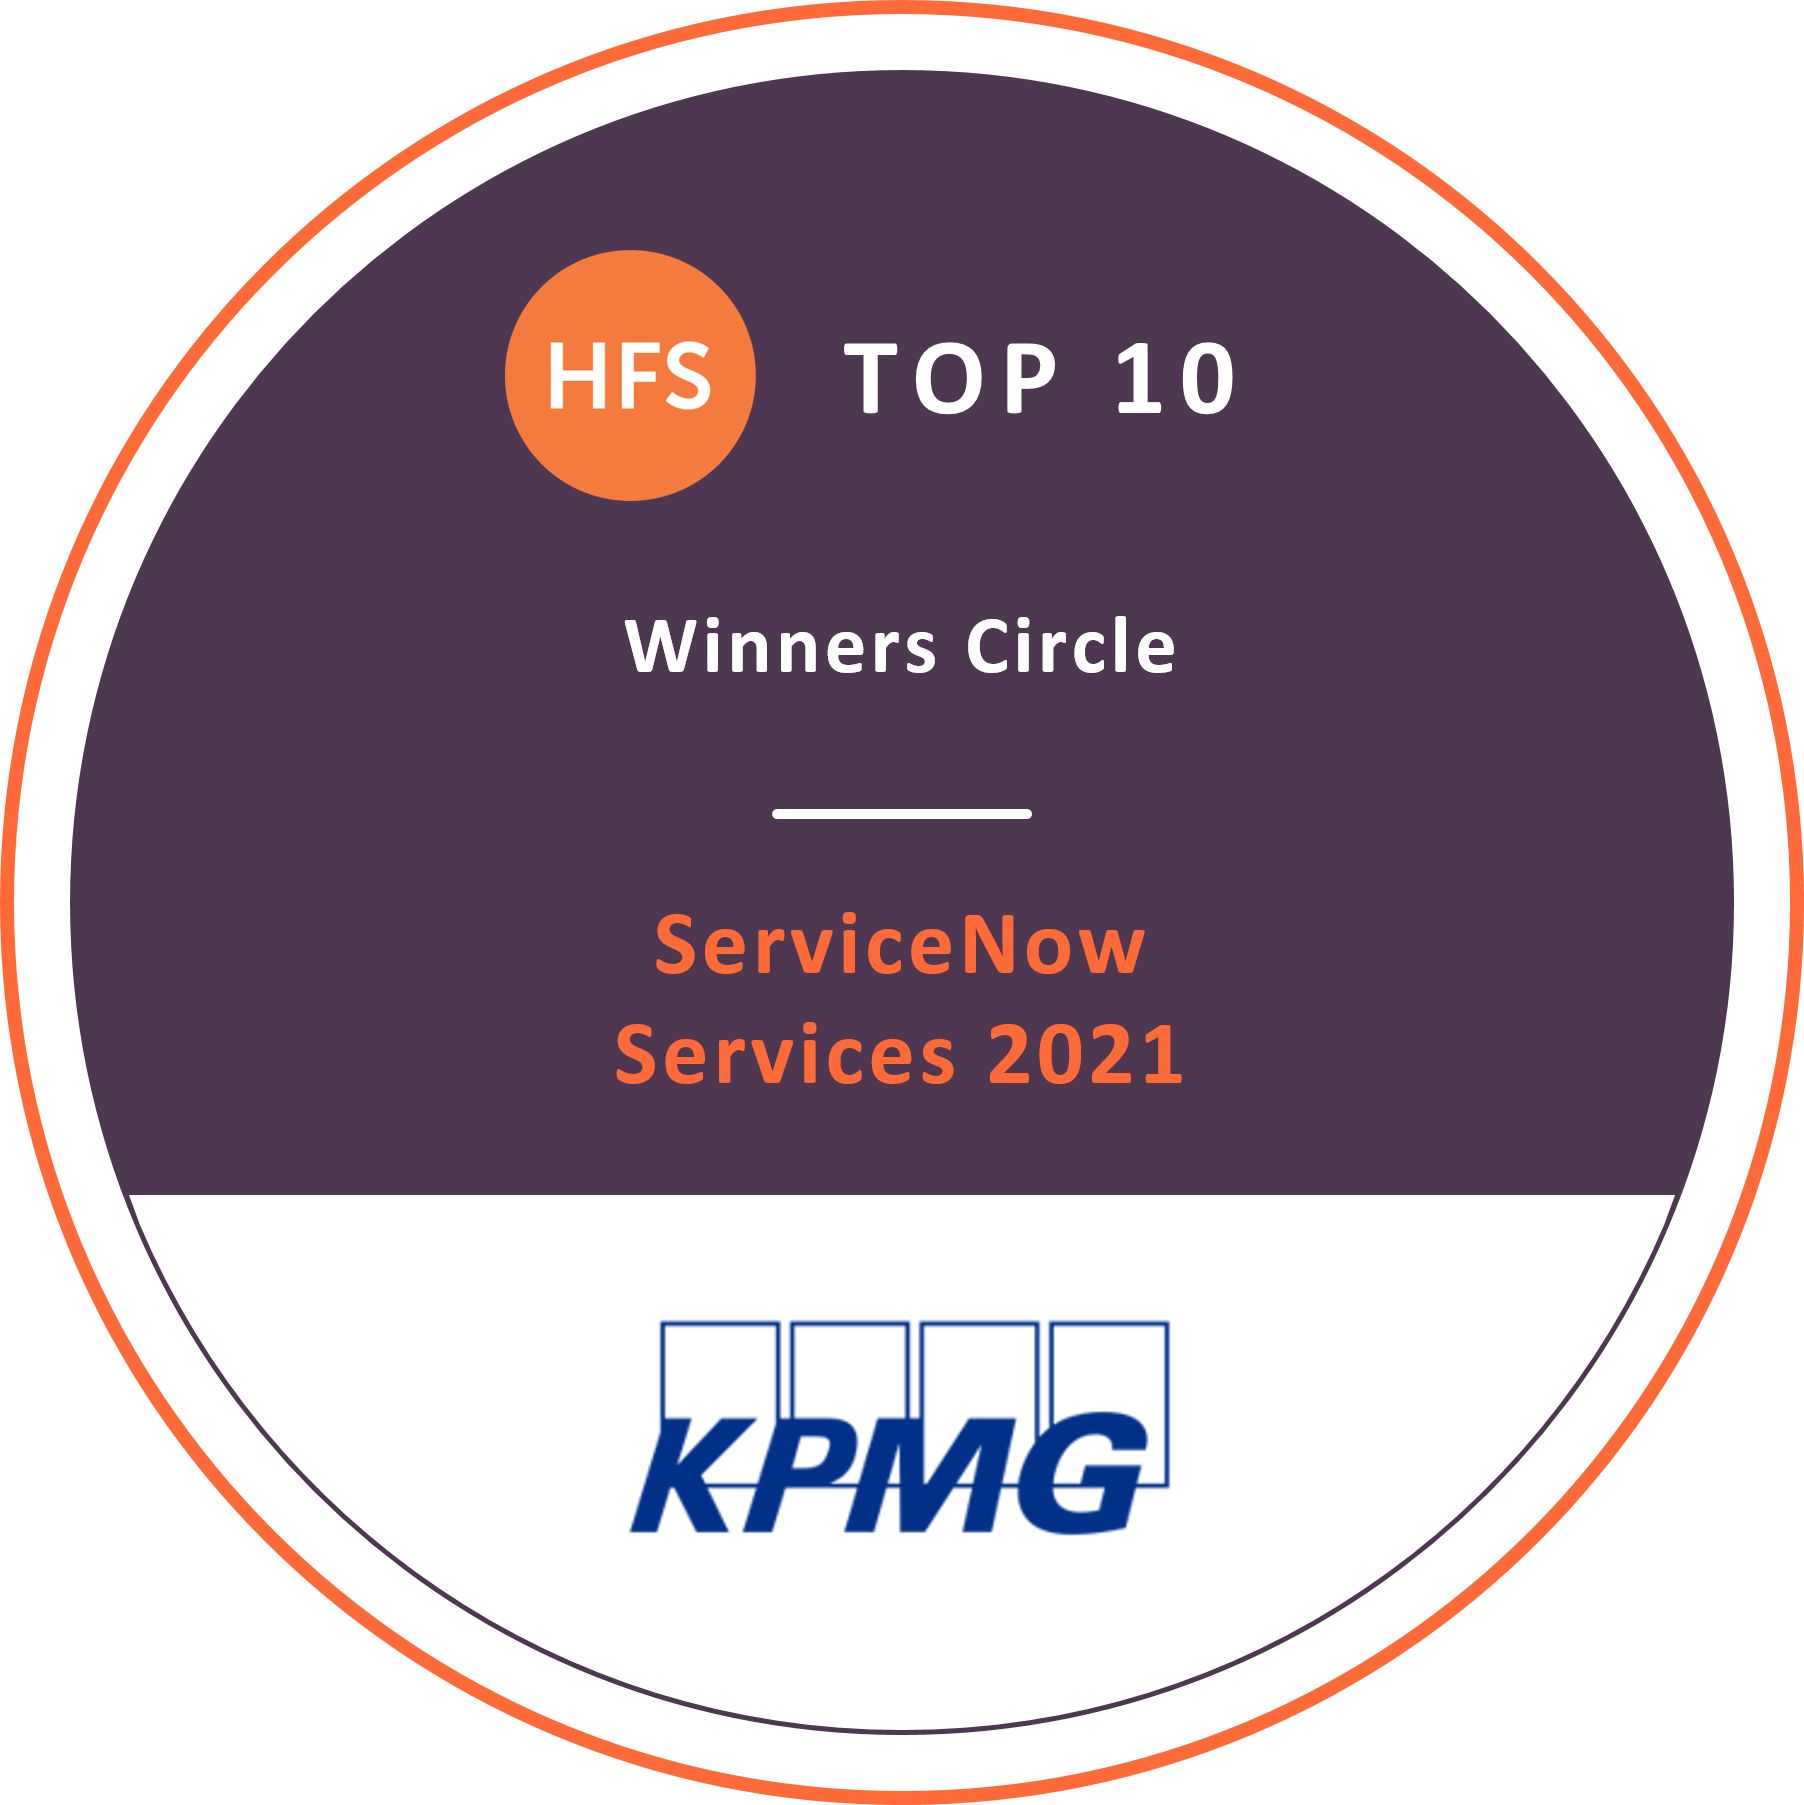 ServiceNow Services 2021